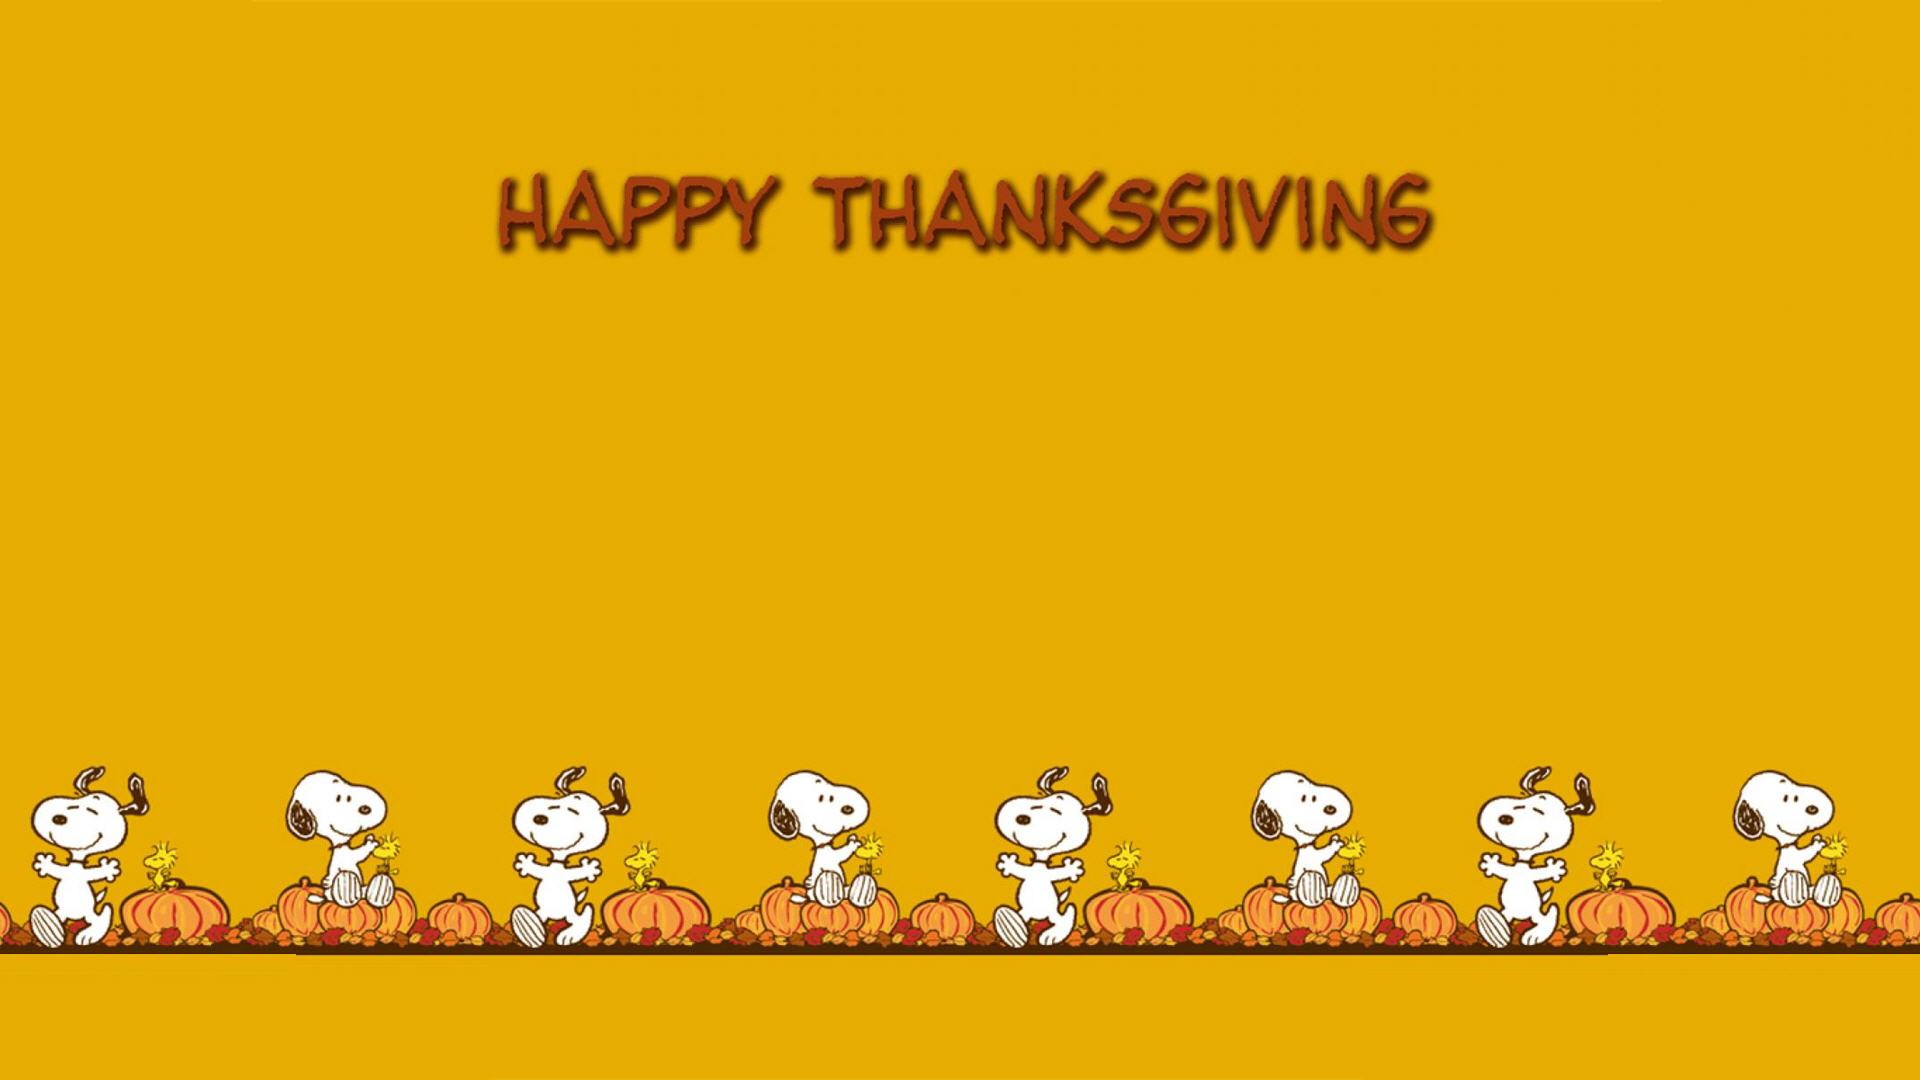 Snoopy Thanksgiving Wallpaper Background Widescreen